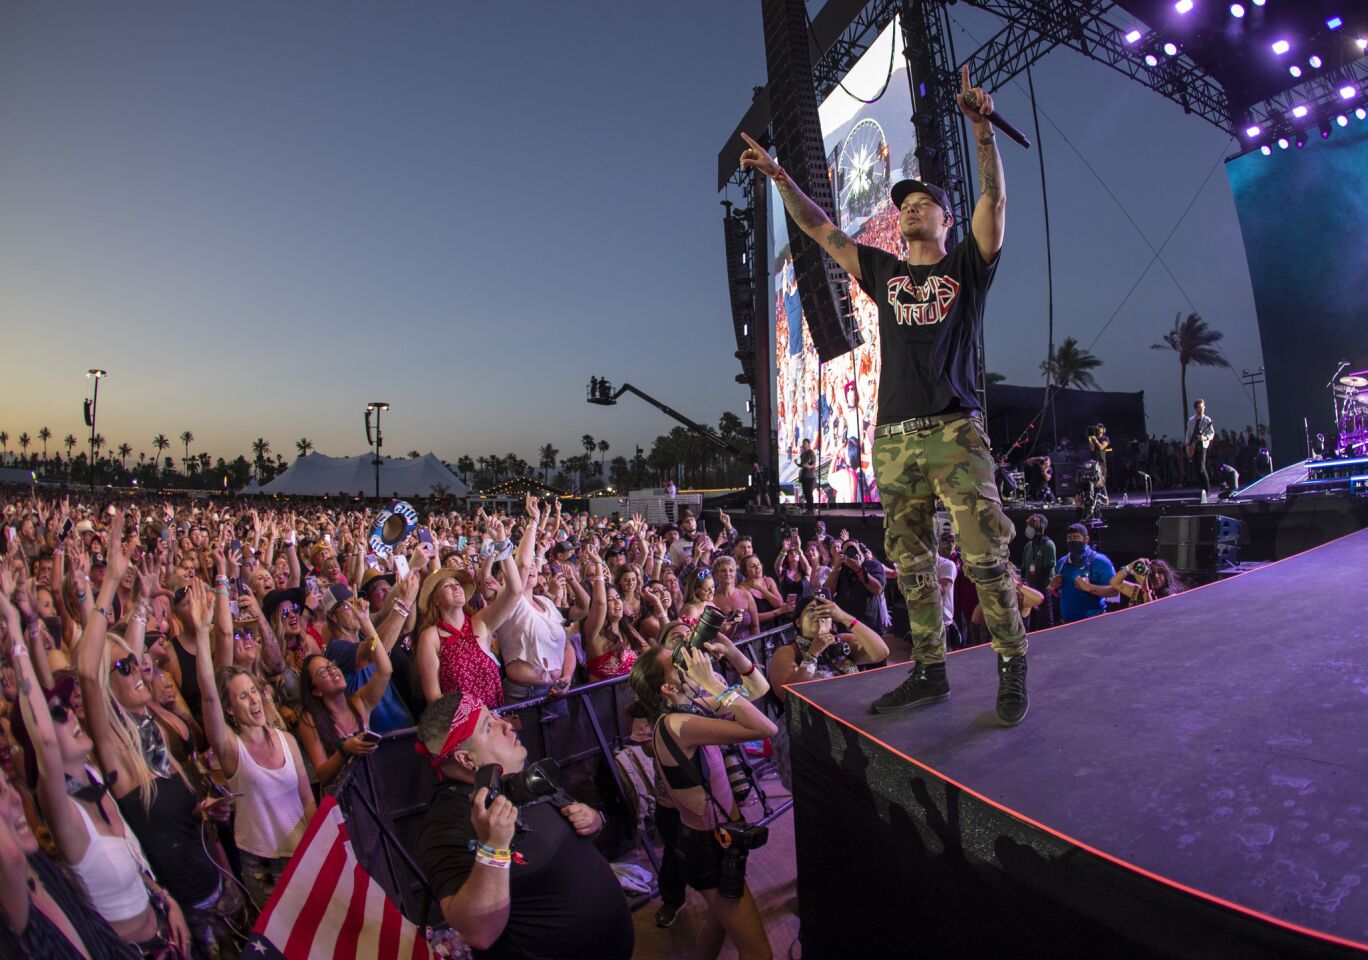 The crowd sings along as Kane Brown performs on the Mane Stage on the first day of the three-day 2019 Stagecoach Country Music Festival.